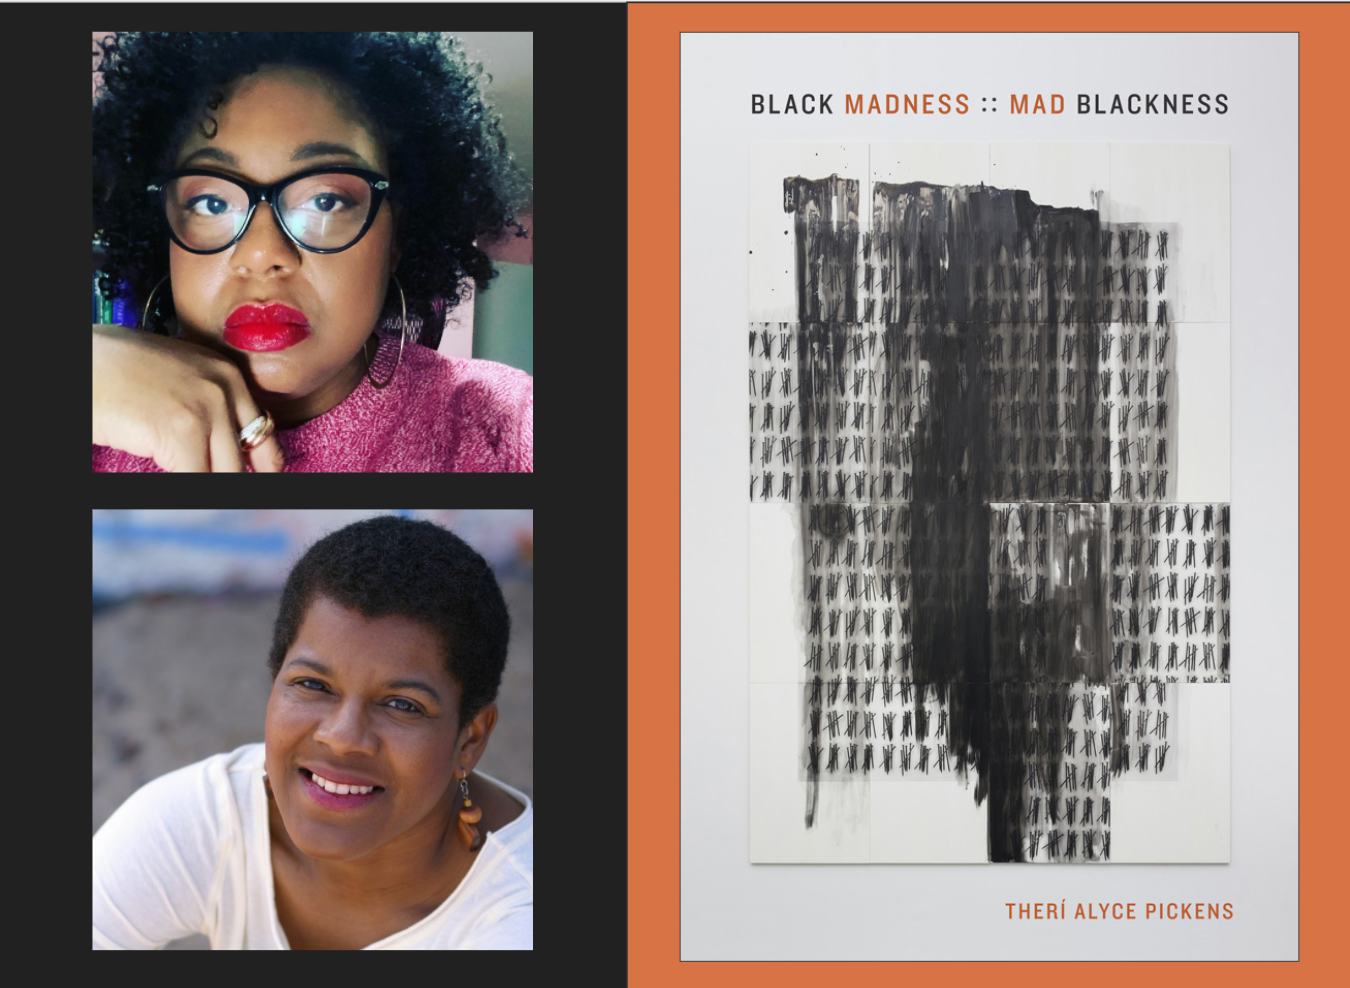 The upper left of this graphic features a photo of Therí Pickens, one of the speakers in this event, staring seriously at the camera while wearing black glasses and bright red lipstick. In the lower left photo, Tananarive Due, another speaker, smiles at the camera. The right side of this graphic depicts the cover of Pickens’s new book, Black Madness: Mad Blackness, against an orange background.